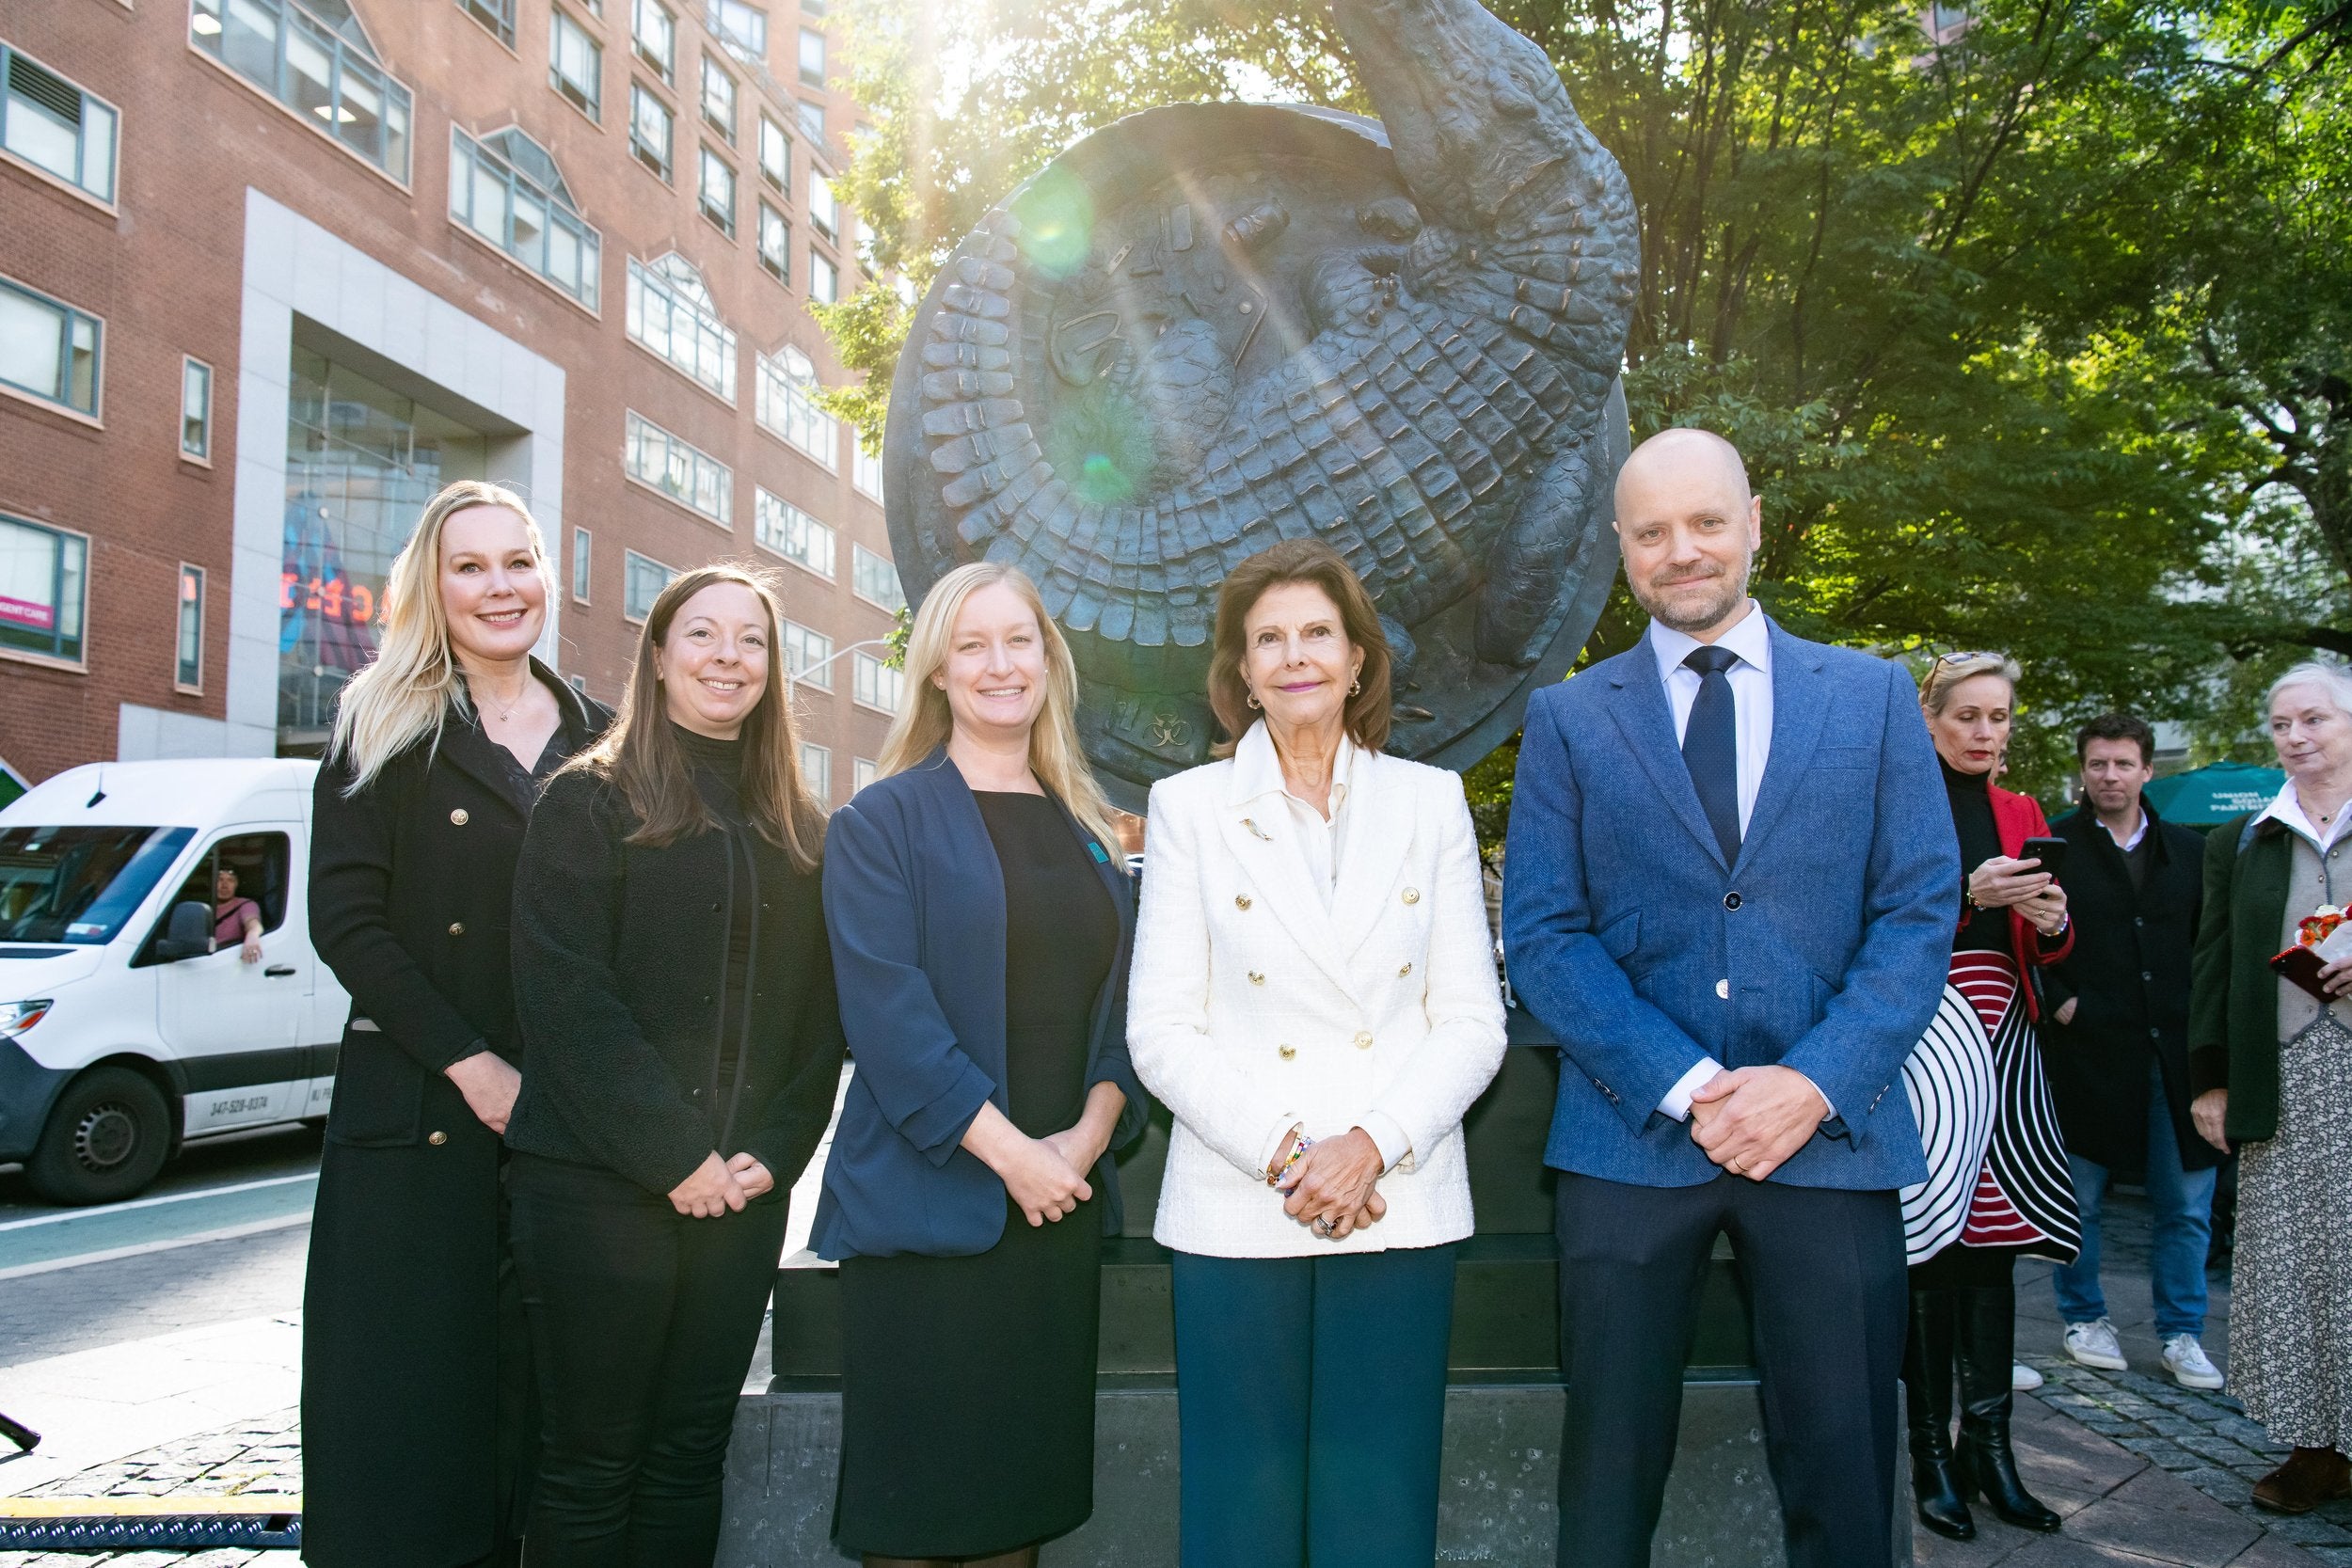 Swedish native Alexander Klingspor on the far right with Queen Silvia of Sweden next to him and NYC parks executives